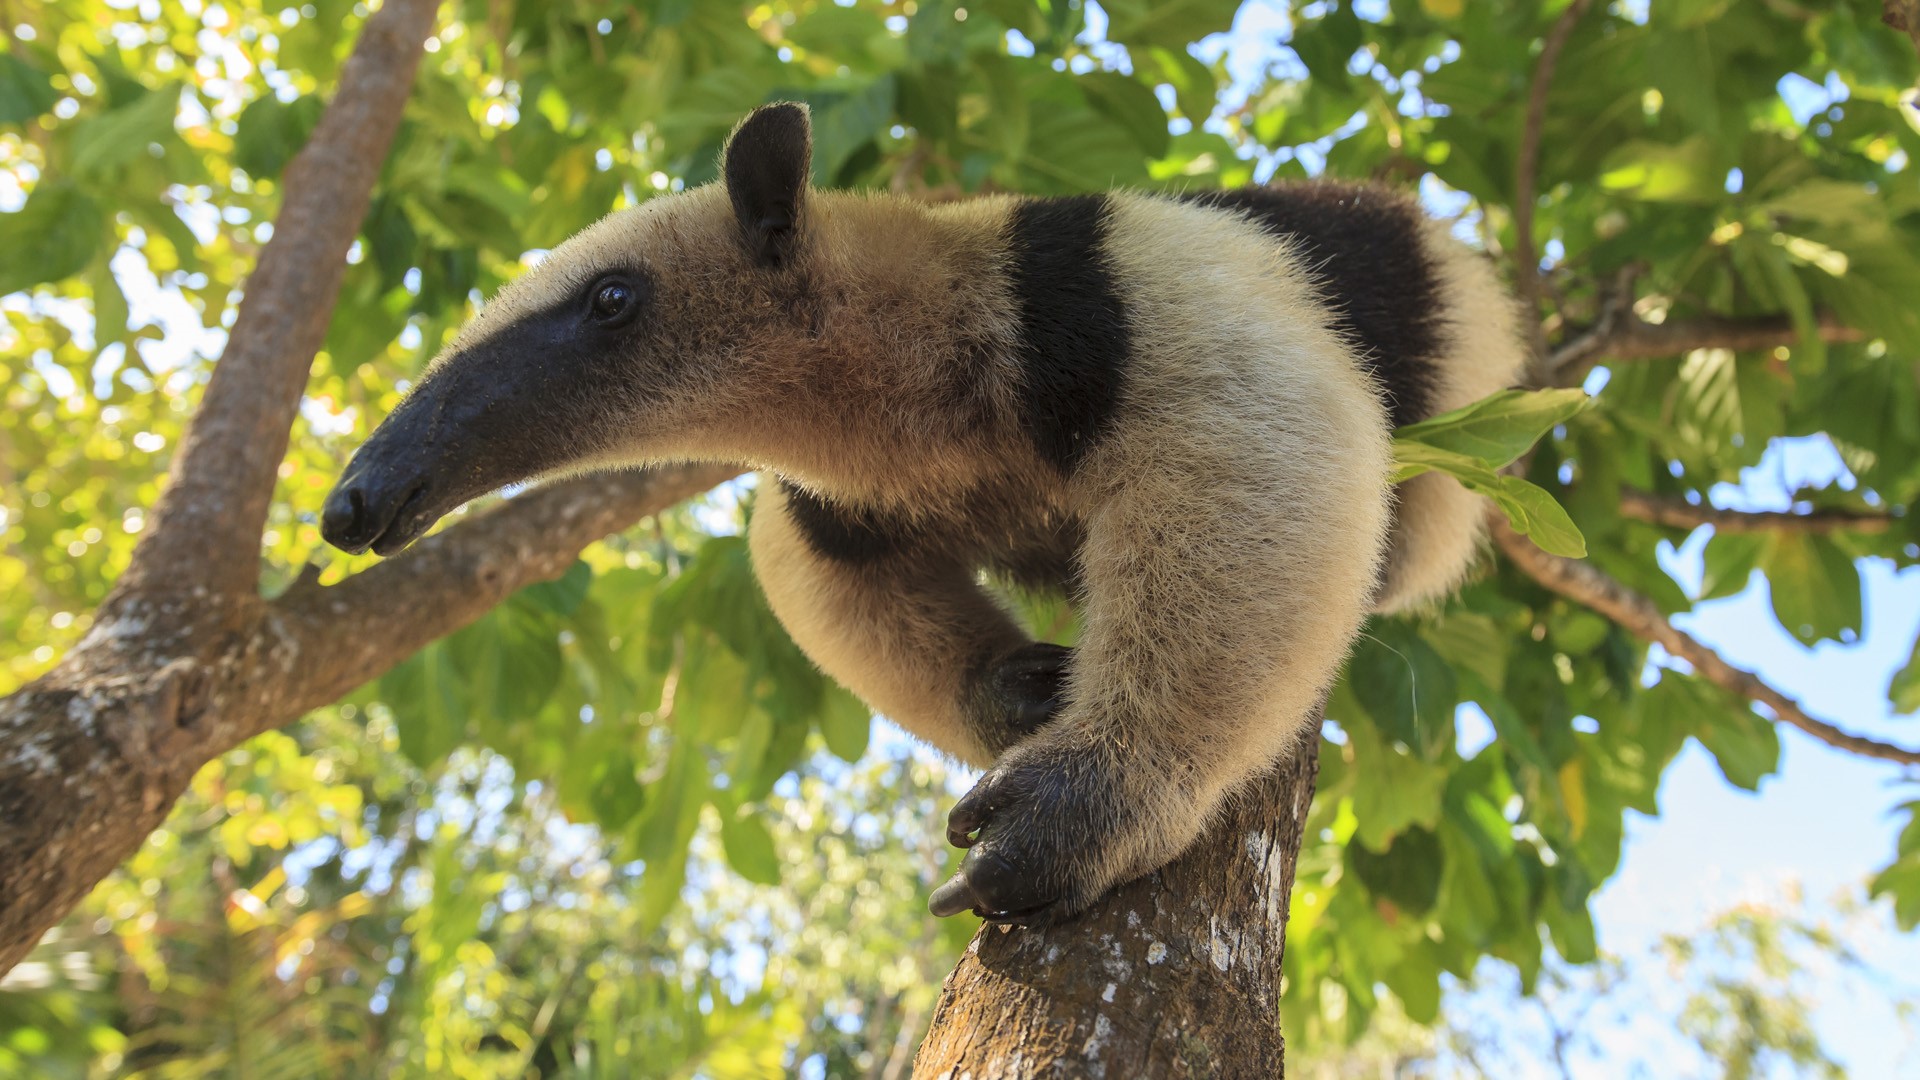 Anteater (Myrmecophaga tridactyla) at rehab center and forest preserve ...